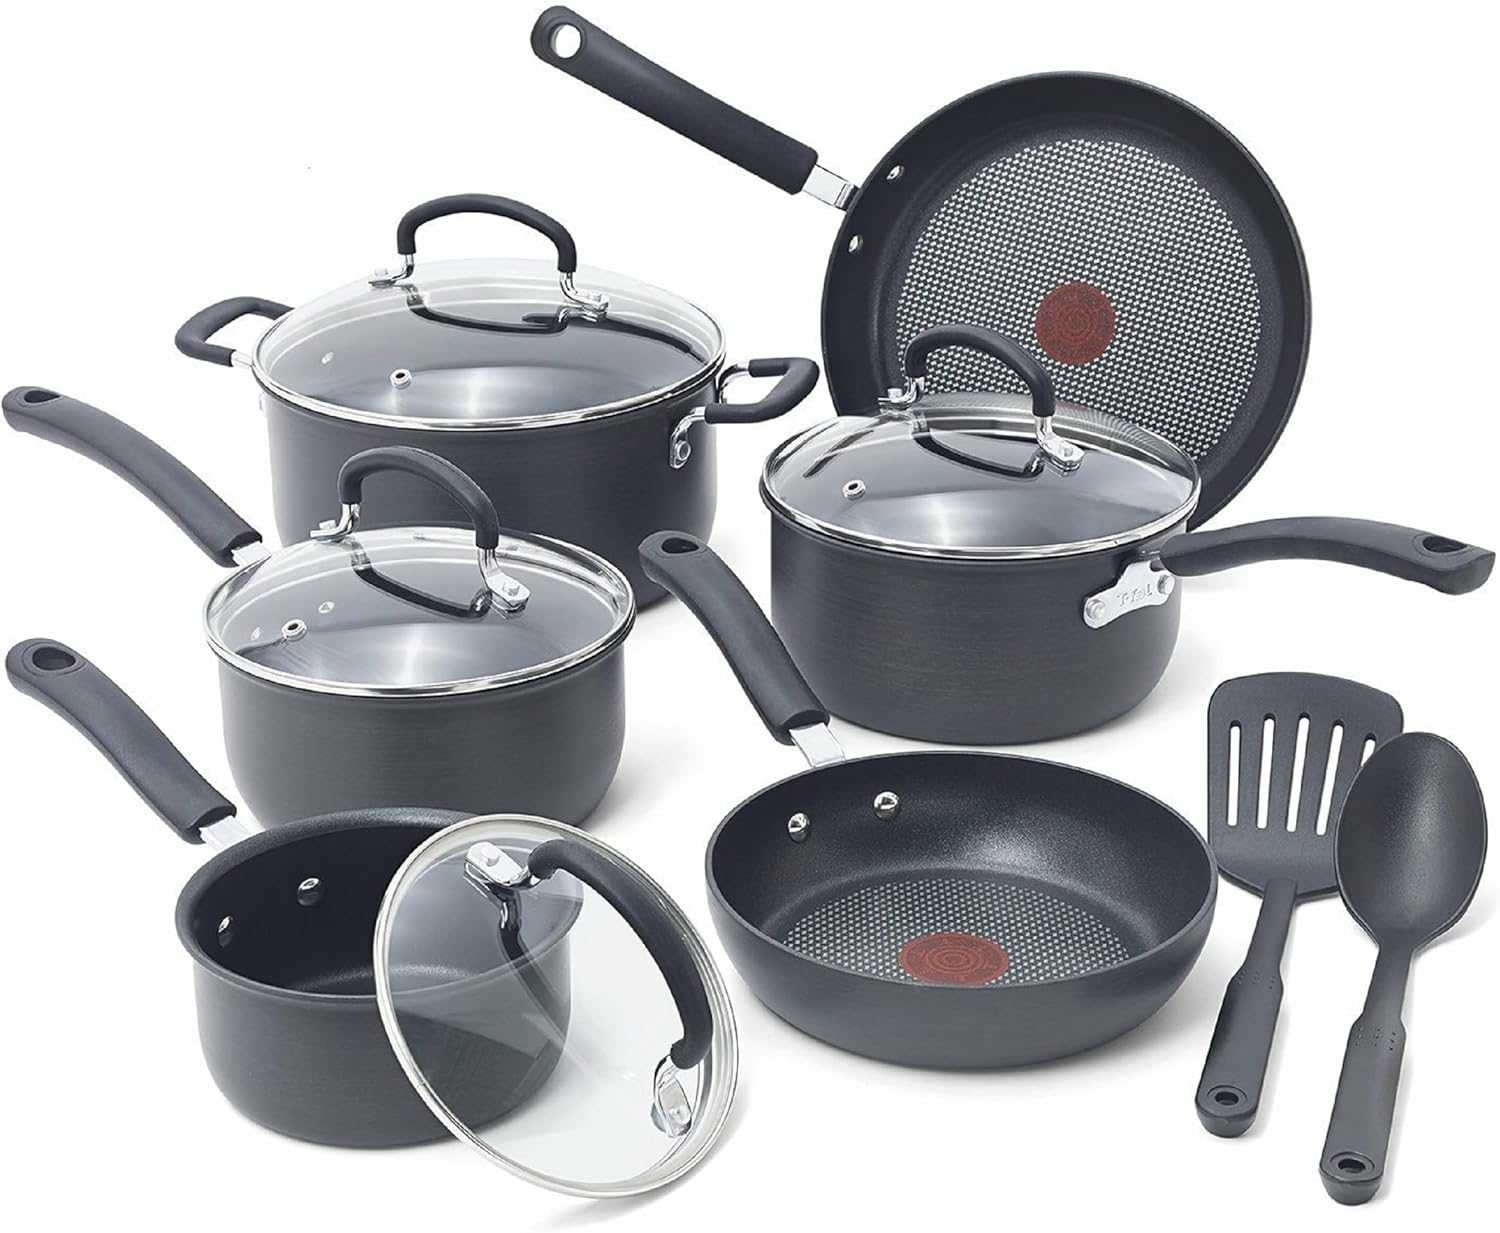 T-fal Ultimate Hard Anodized Nonstick Cookware Set